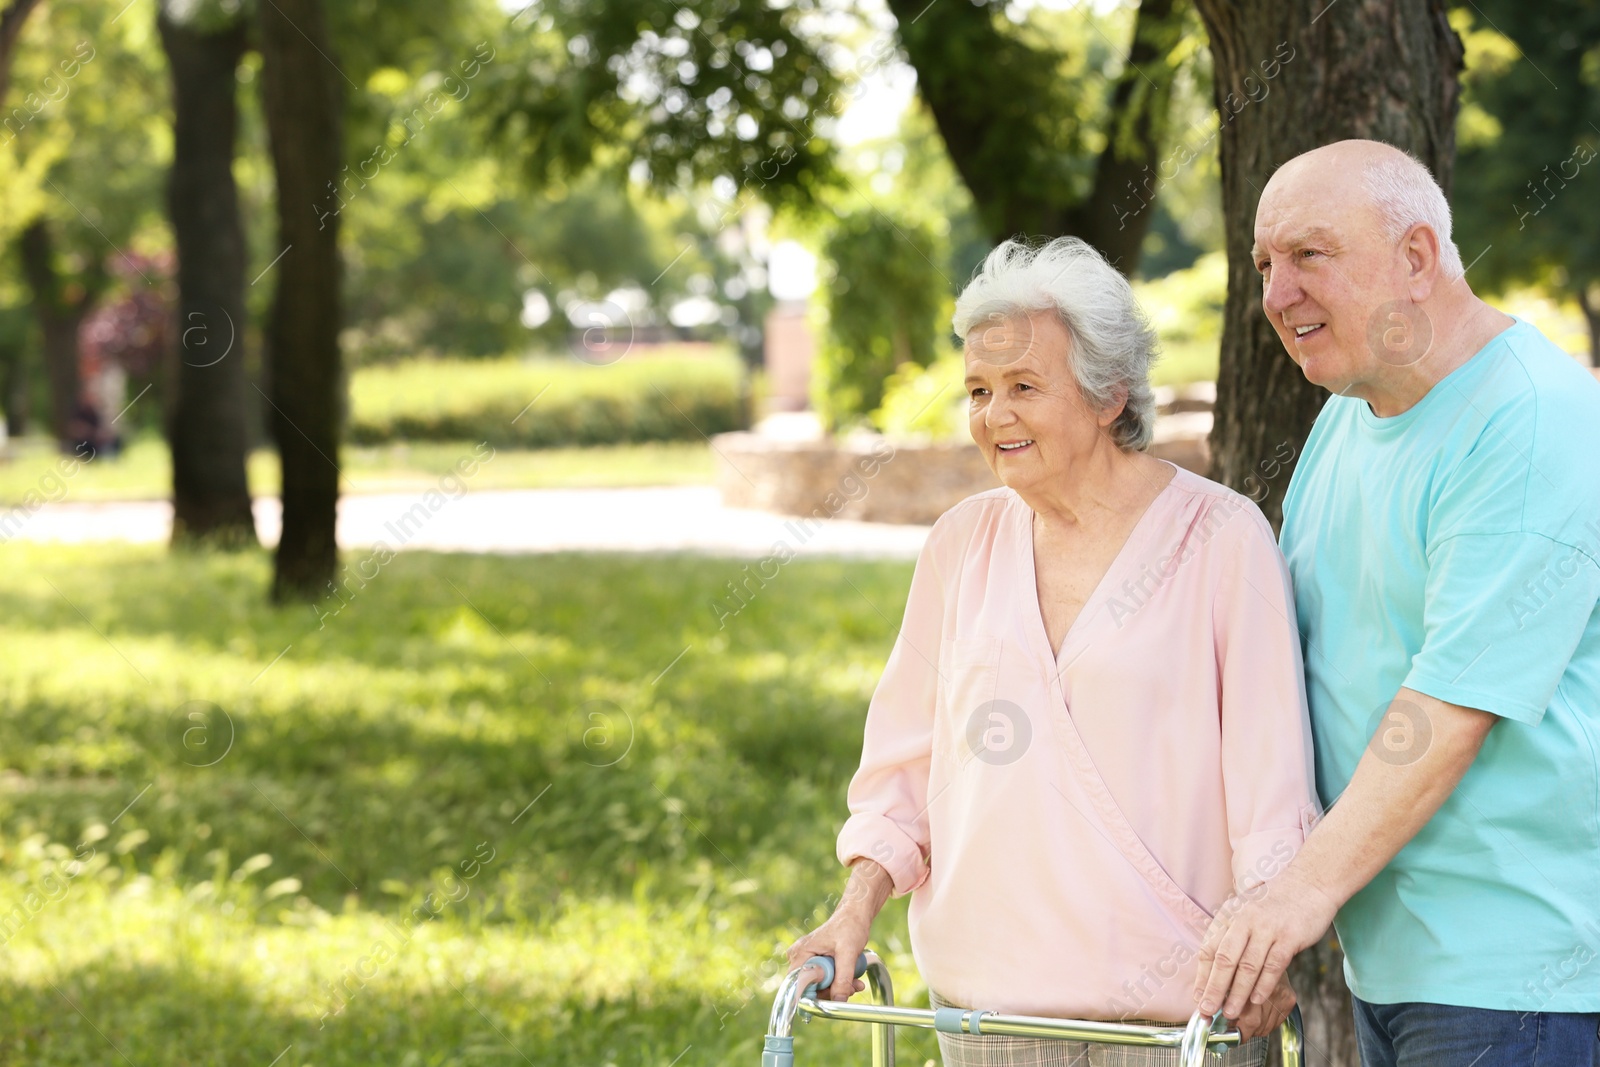 Photo of Elderly man helping his wife with walking frame outdoors